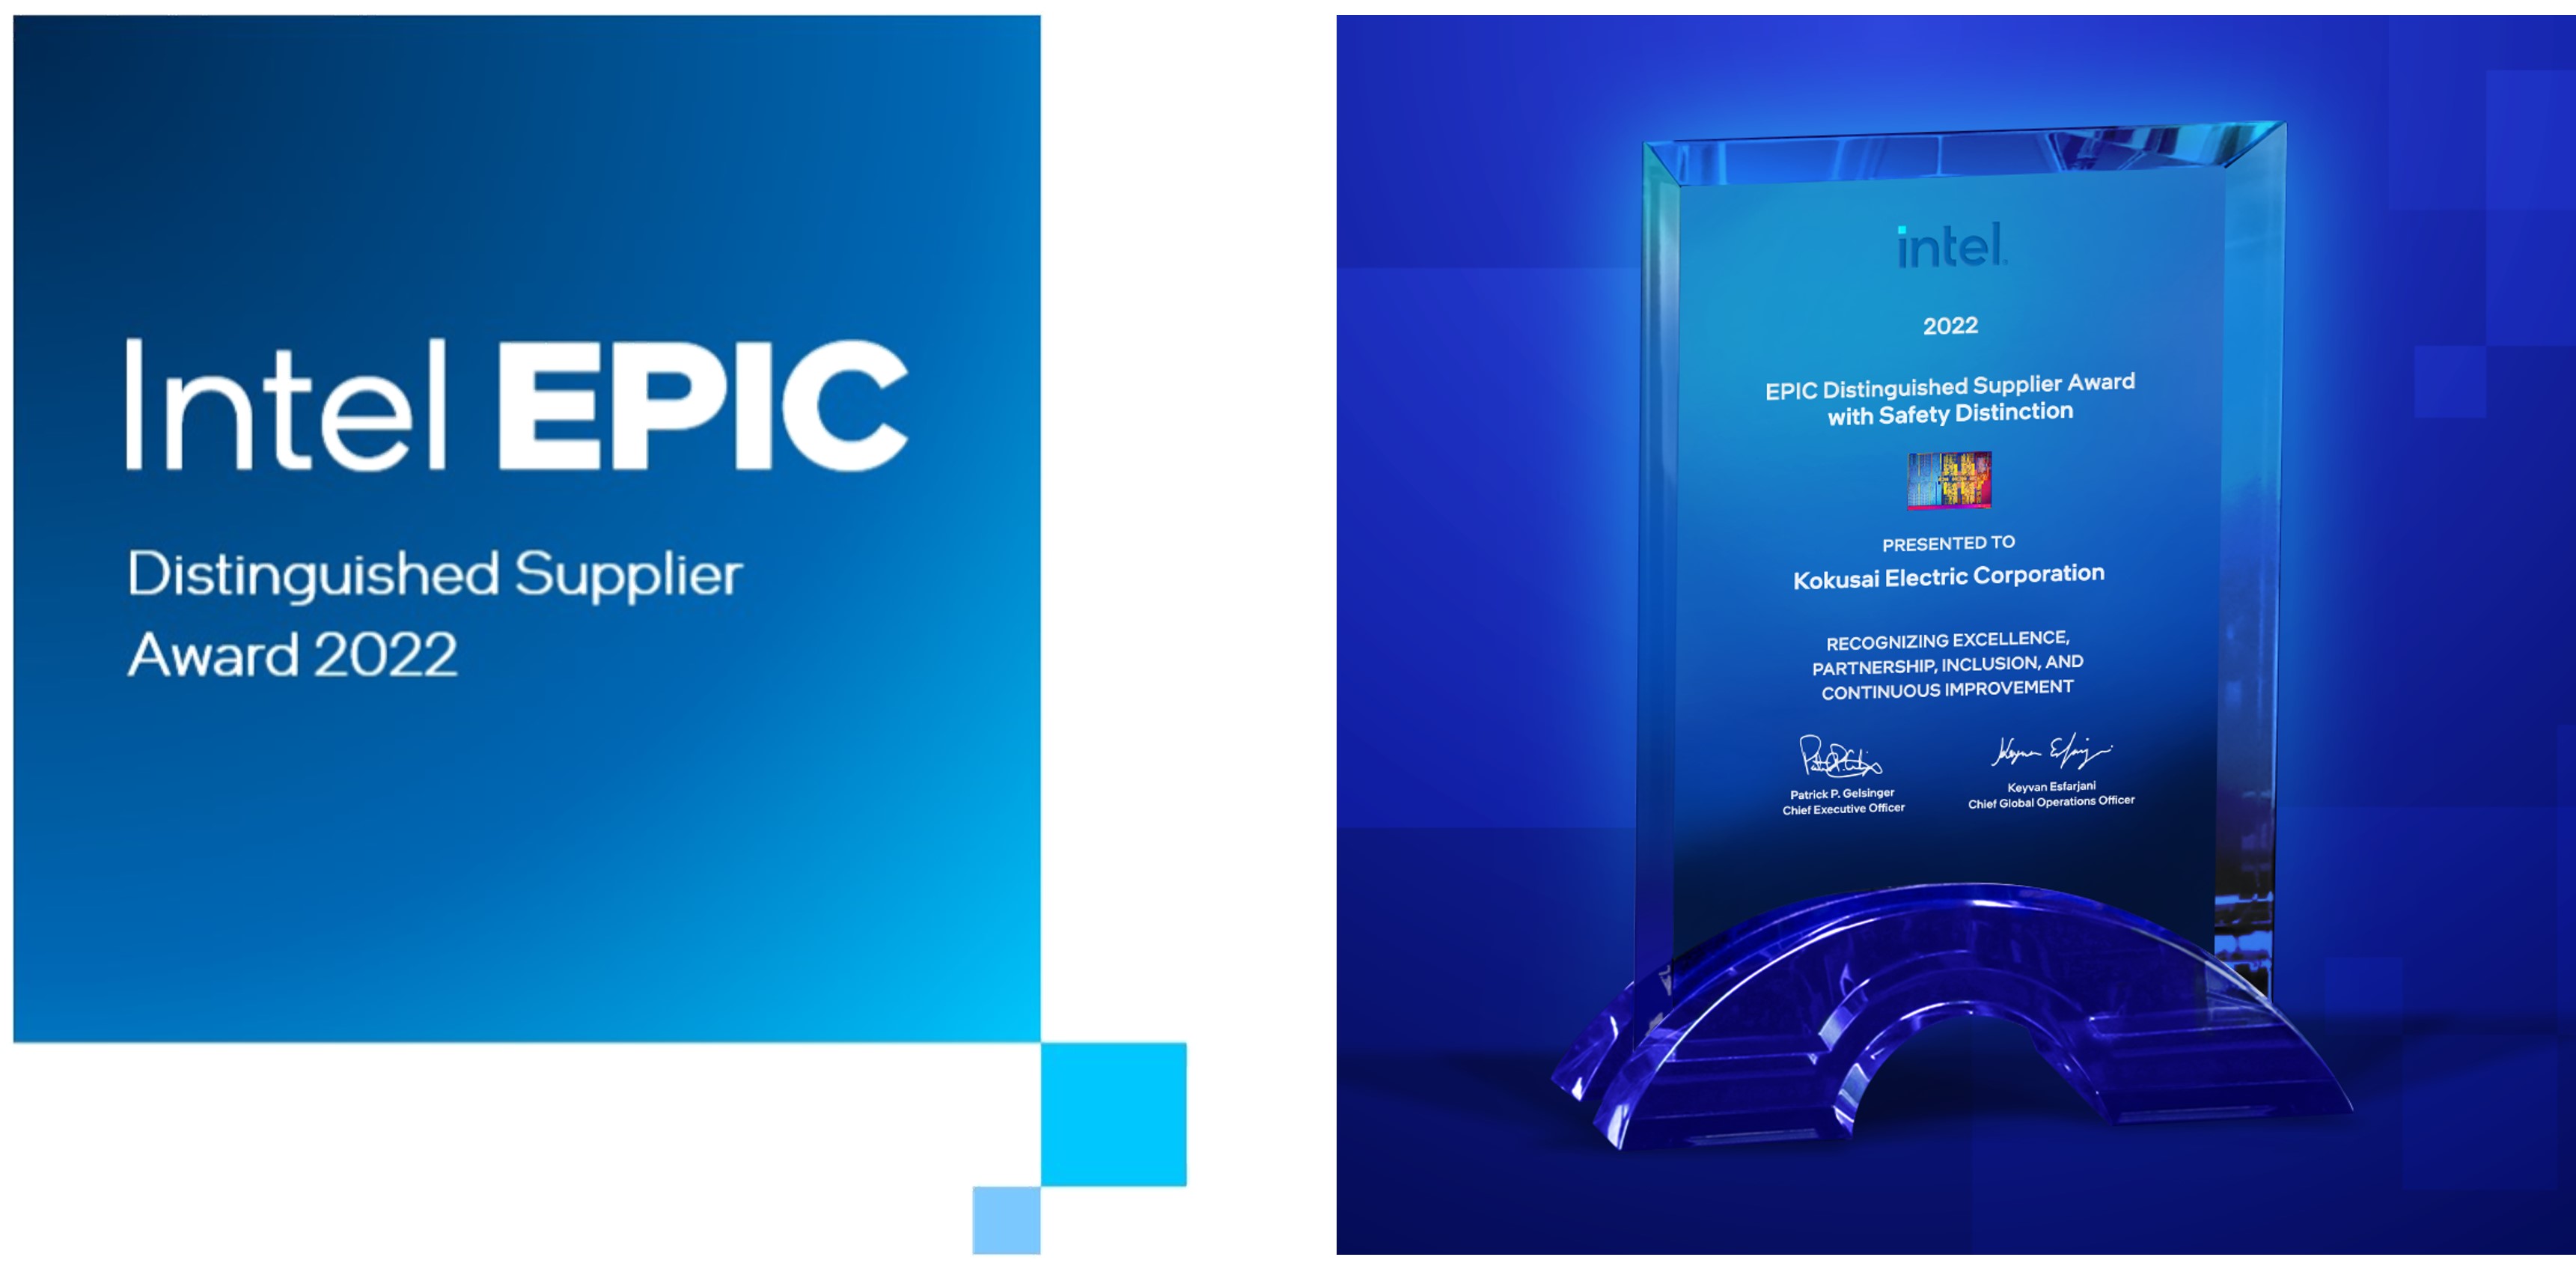 KOKUSAI ELECTRIC CORPORATION Earns Intel’s 2022 EPIC Distinguished Supplier Award with Safety